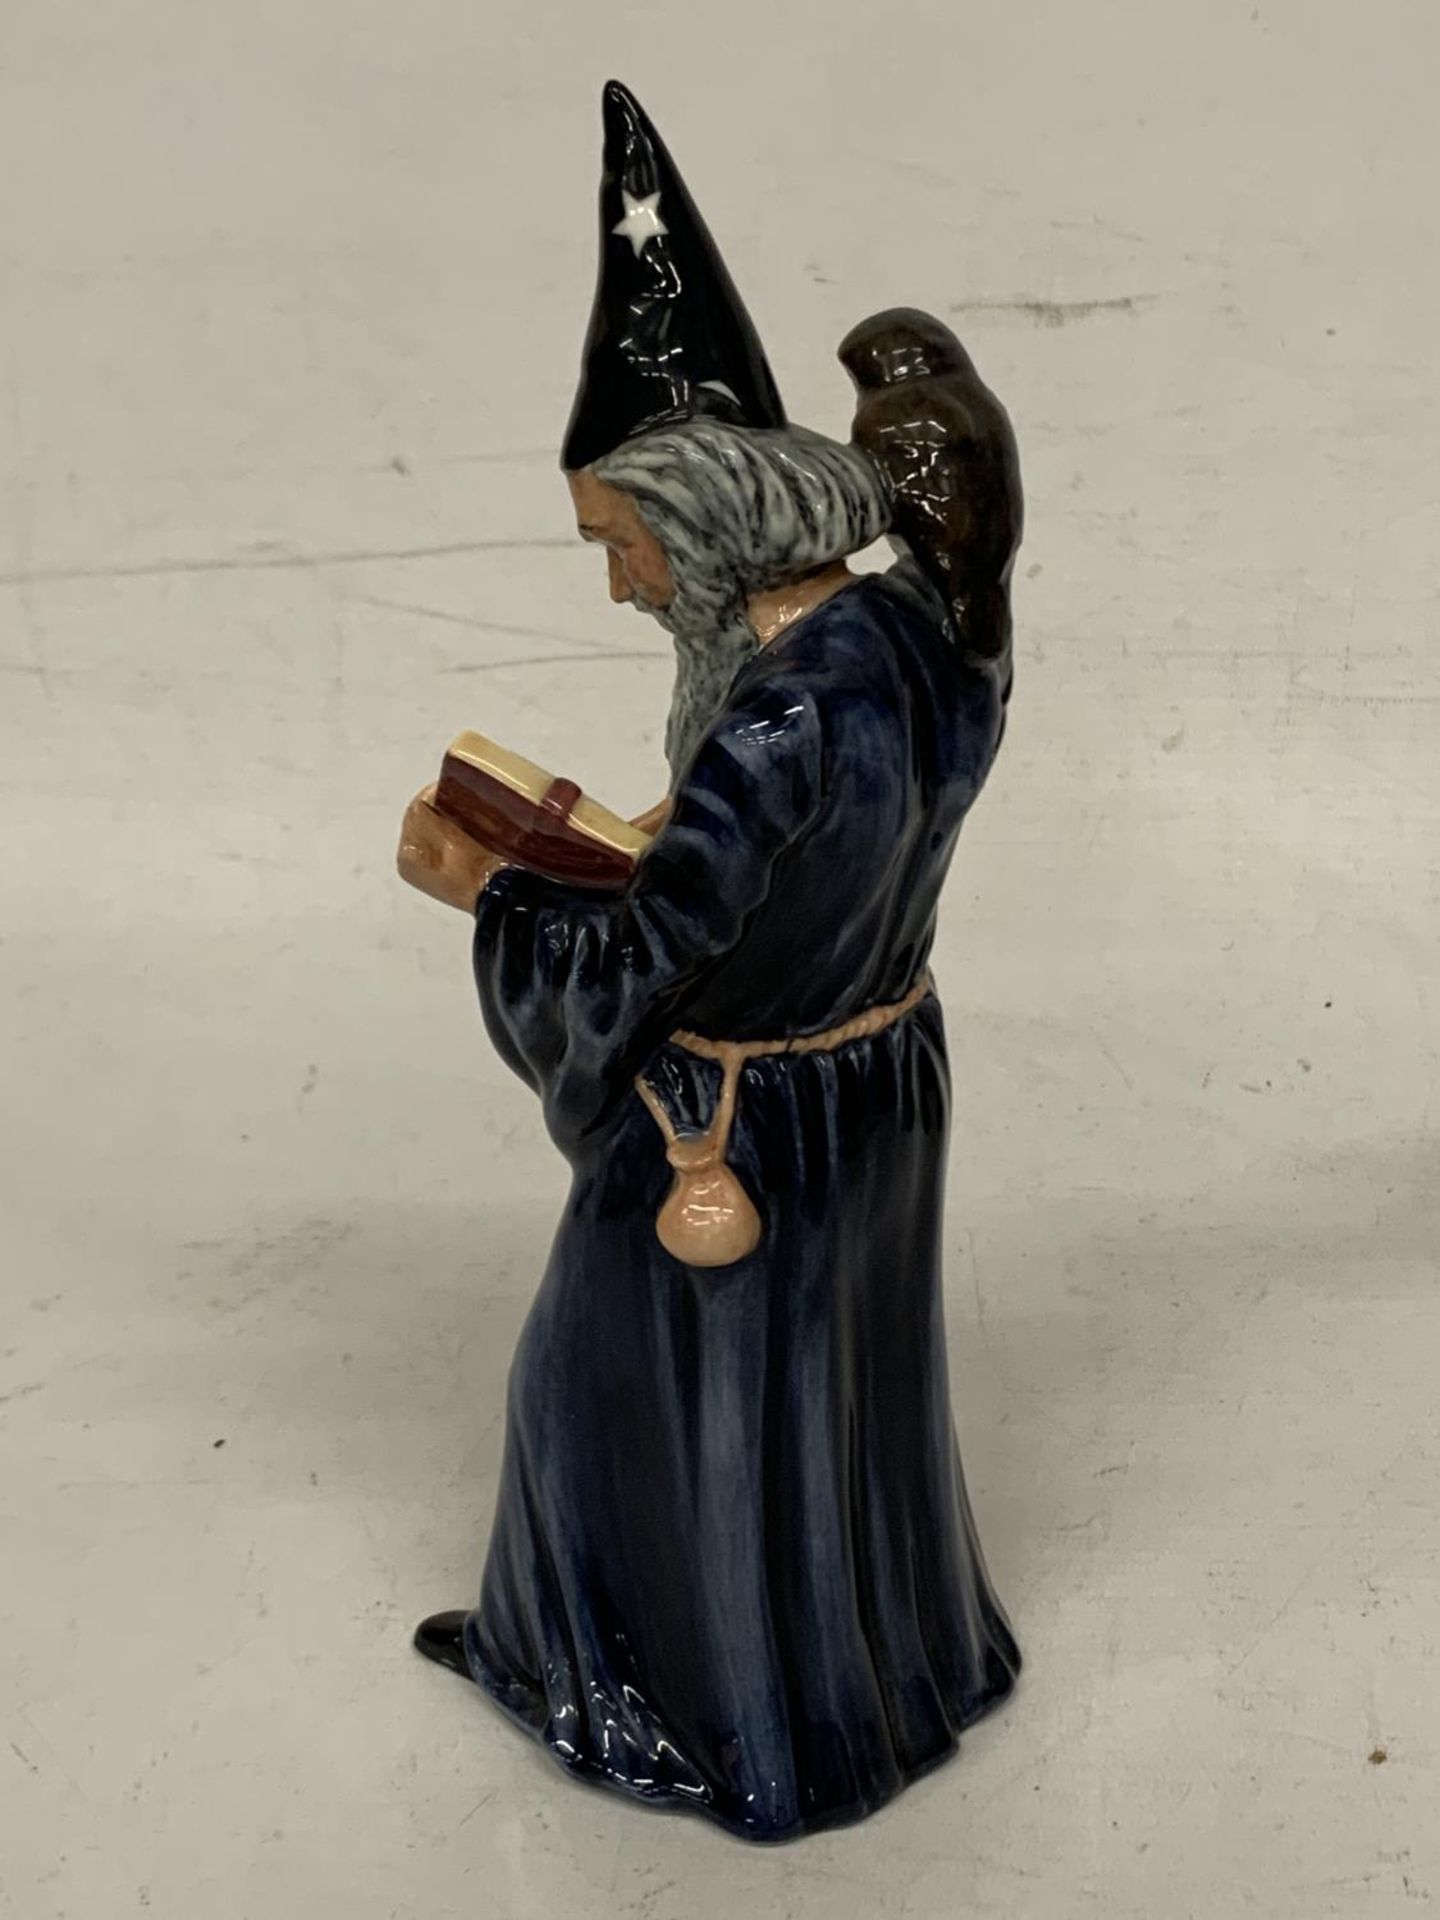 A ROYAL DOULTON FIGURE "THE WIZARD" HN 2877 - Image 3 of 4